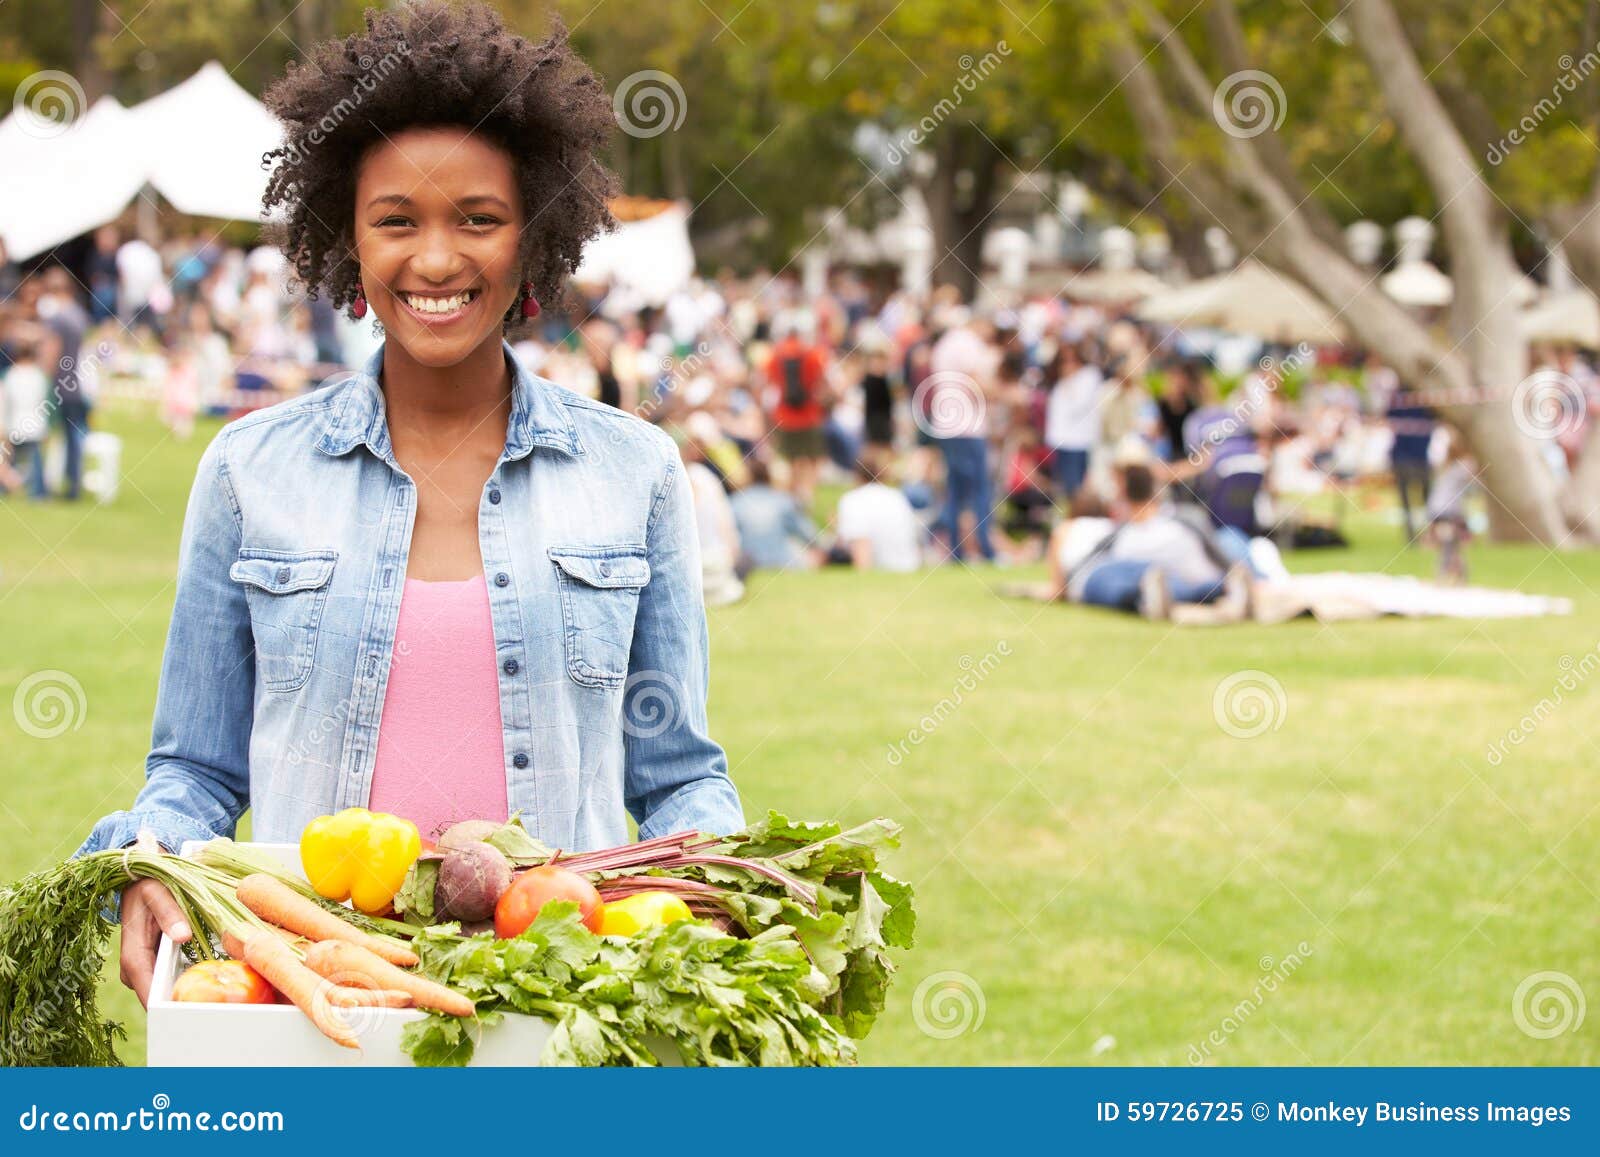 woman with fresh produce bought at outdoor farmers market